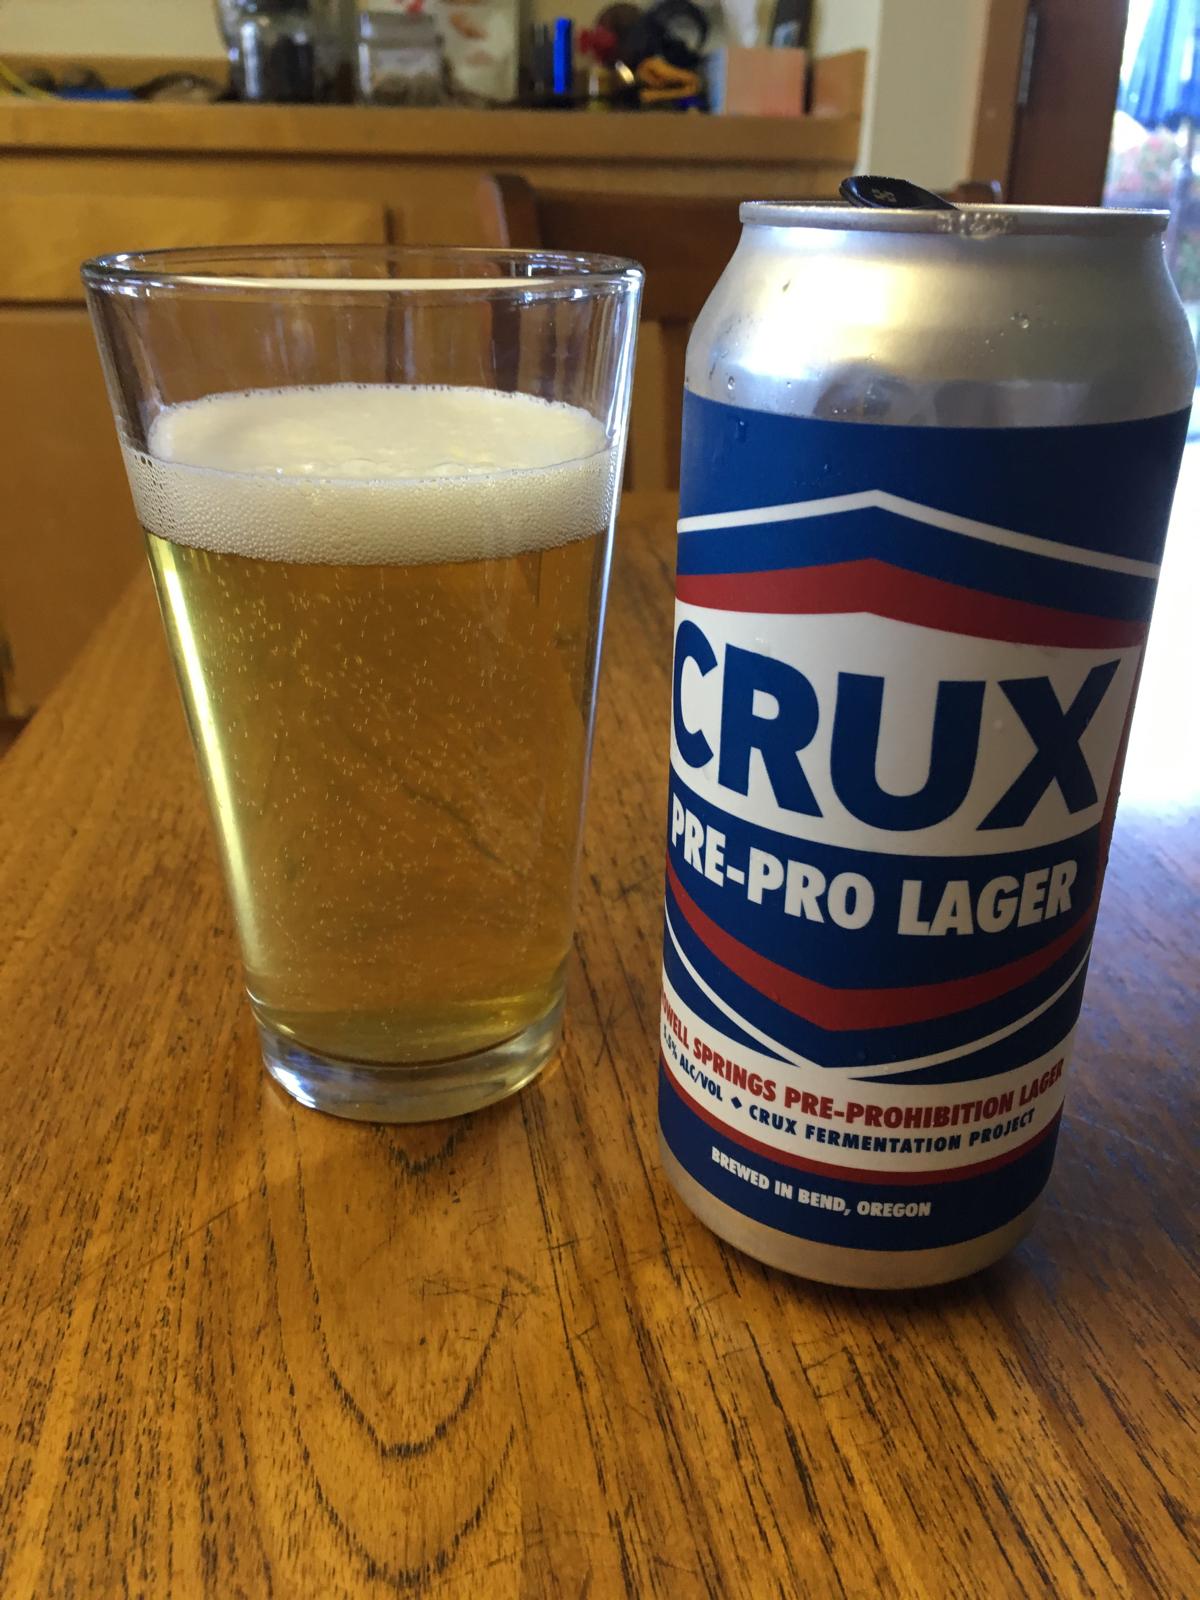 Pre-Pro Lager